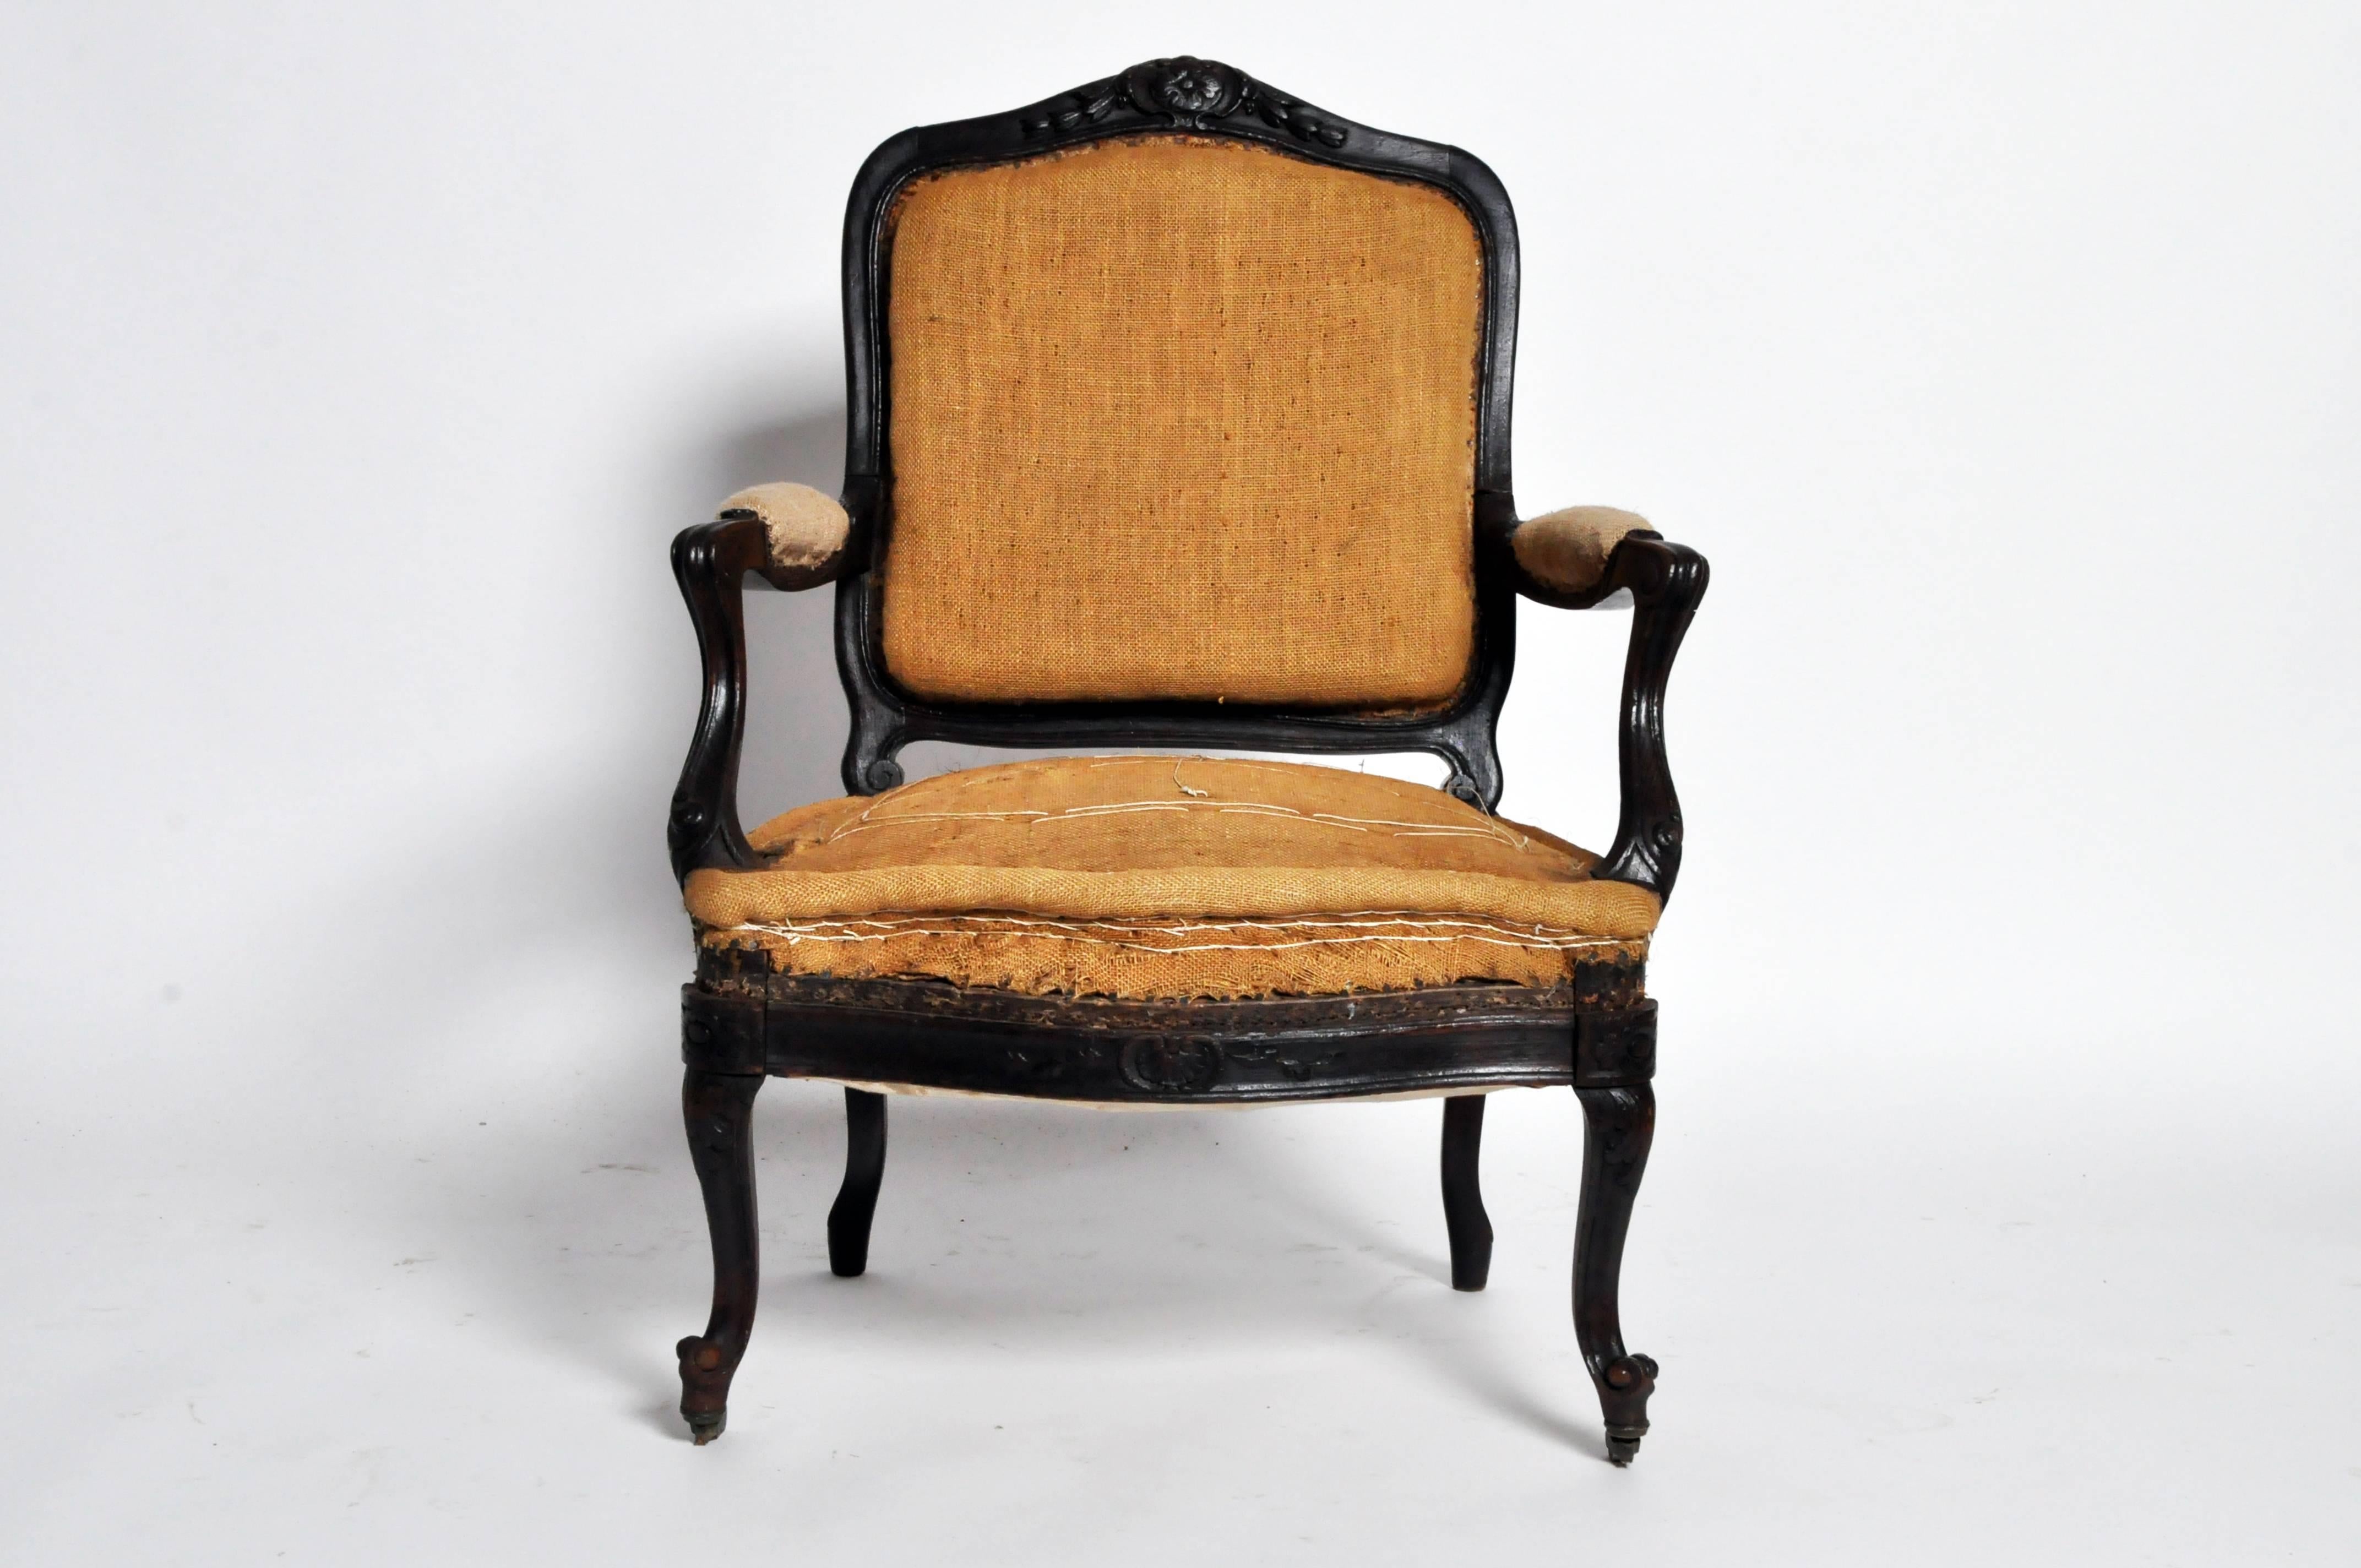 This gorgeous set of four Napoleon III armchairs represents the perfect balance of old world sophistication and antique beauty. Rich, dark wood frames, incised with stylized groves and undulating floral motifs, showcase the original backsides and